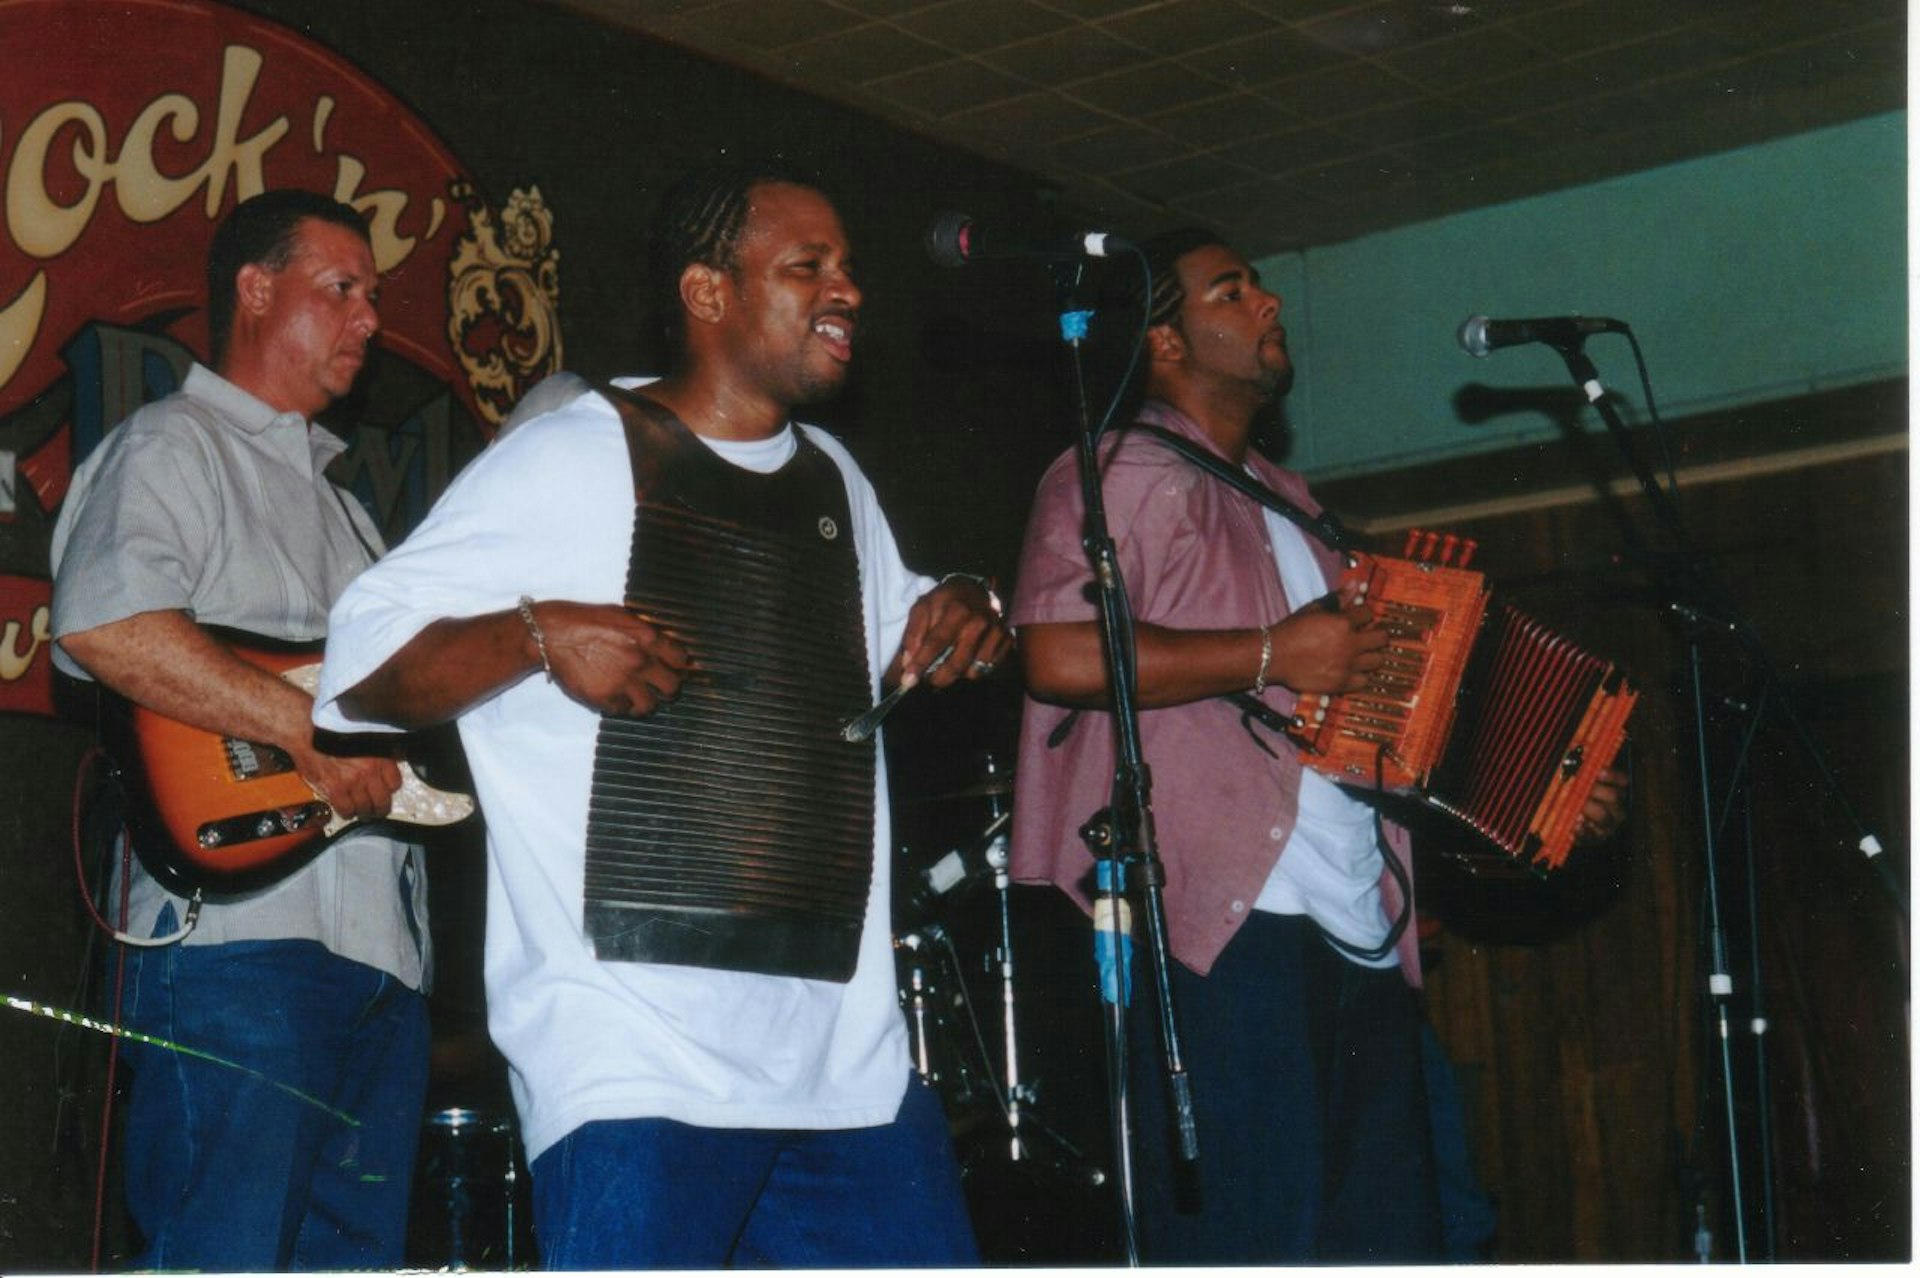 Zydeco band playing at Mid City Rock n Bowl. Image by Bruce Tuten / CC BY 2.0